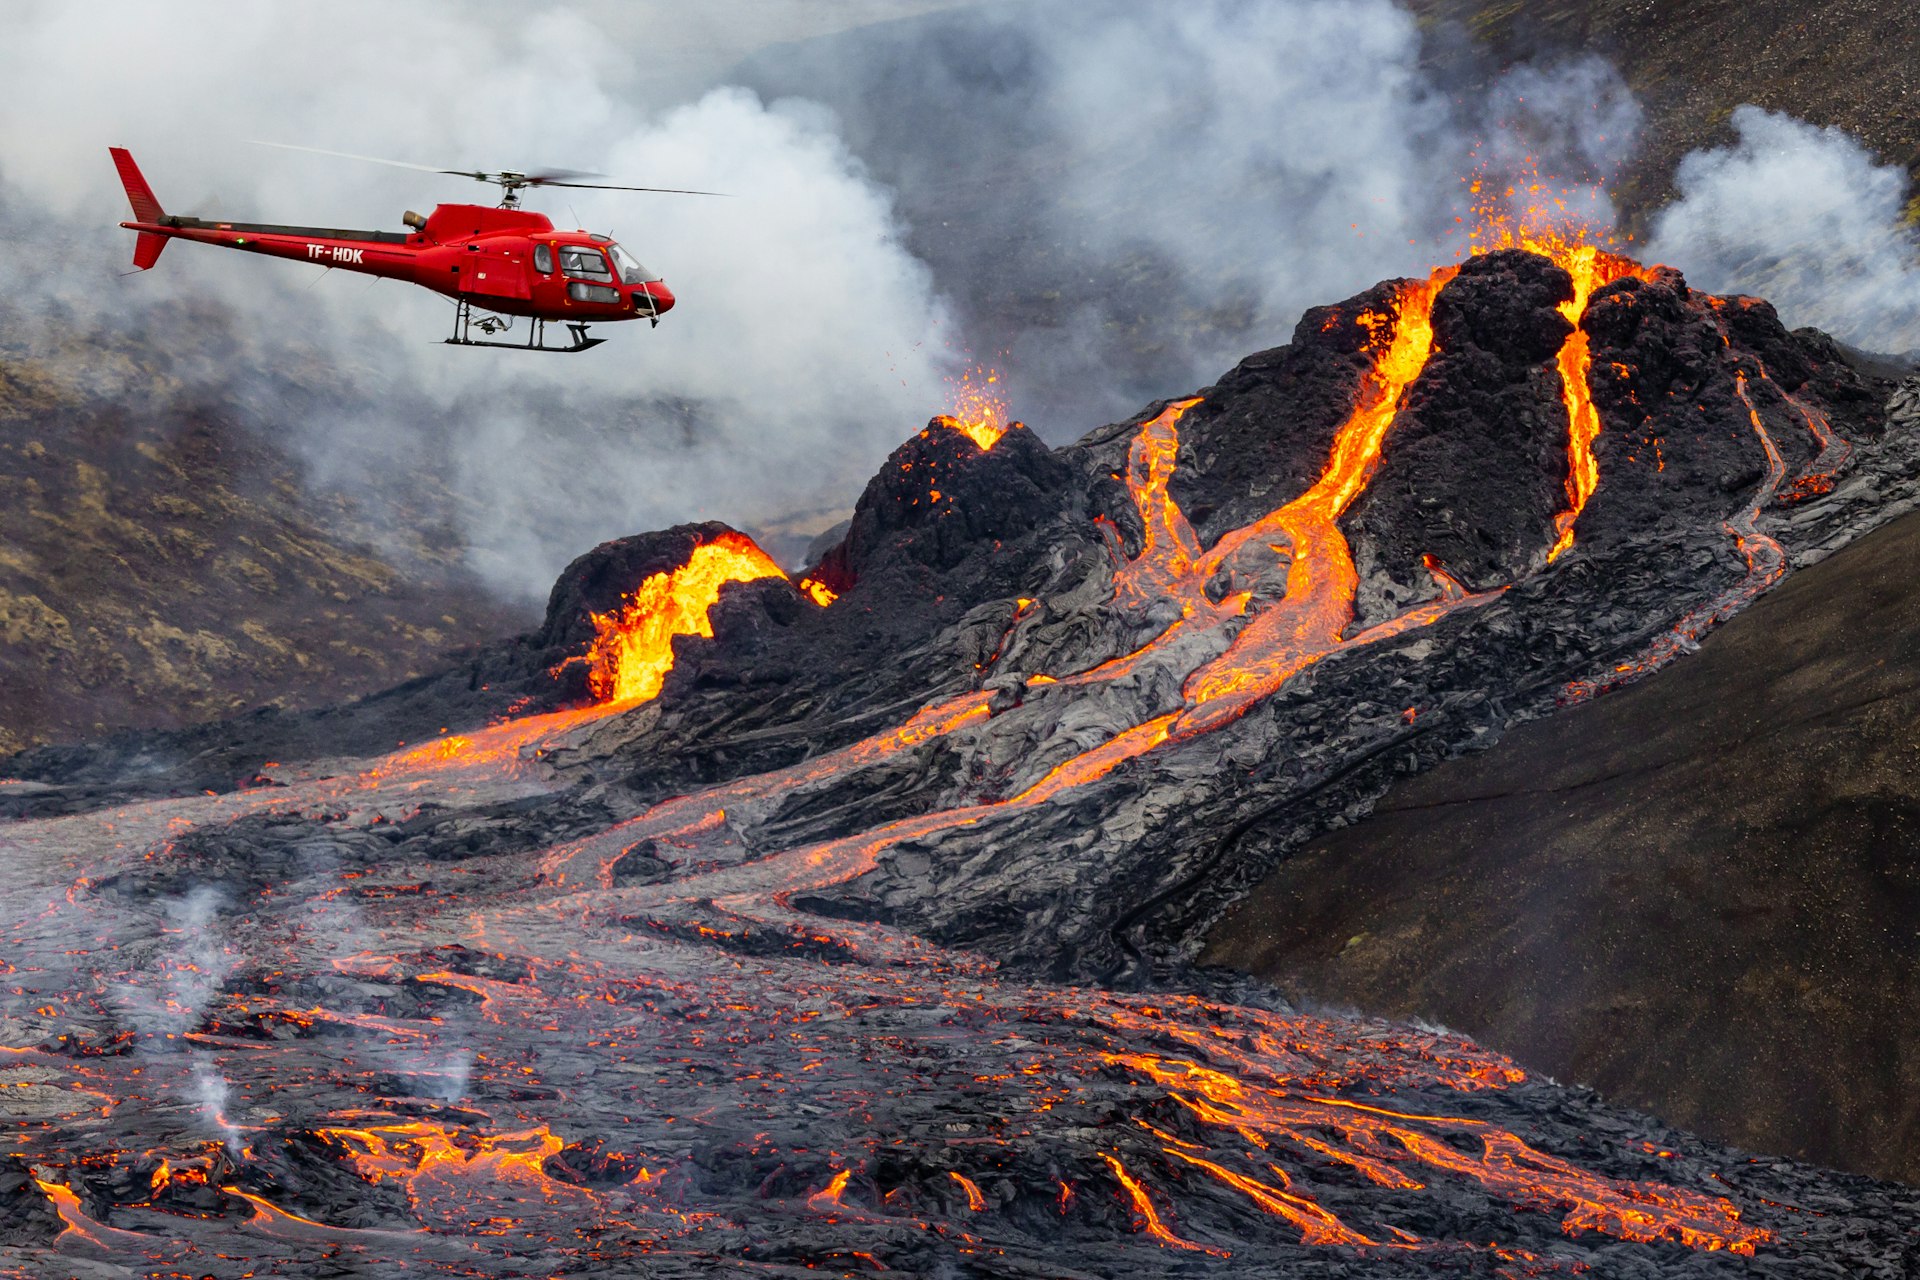 A helicoptor flies in front of lava flow from an active volcano